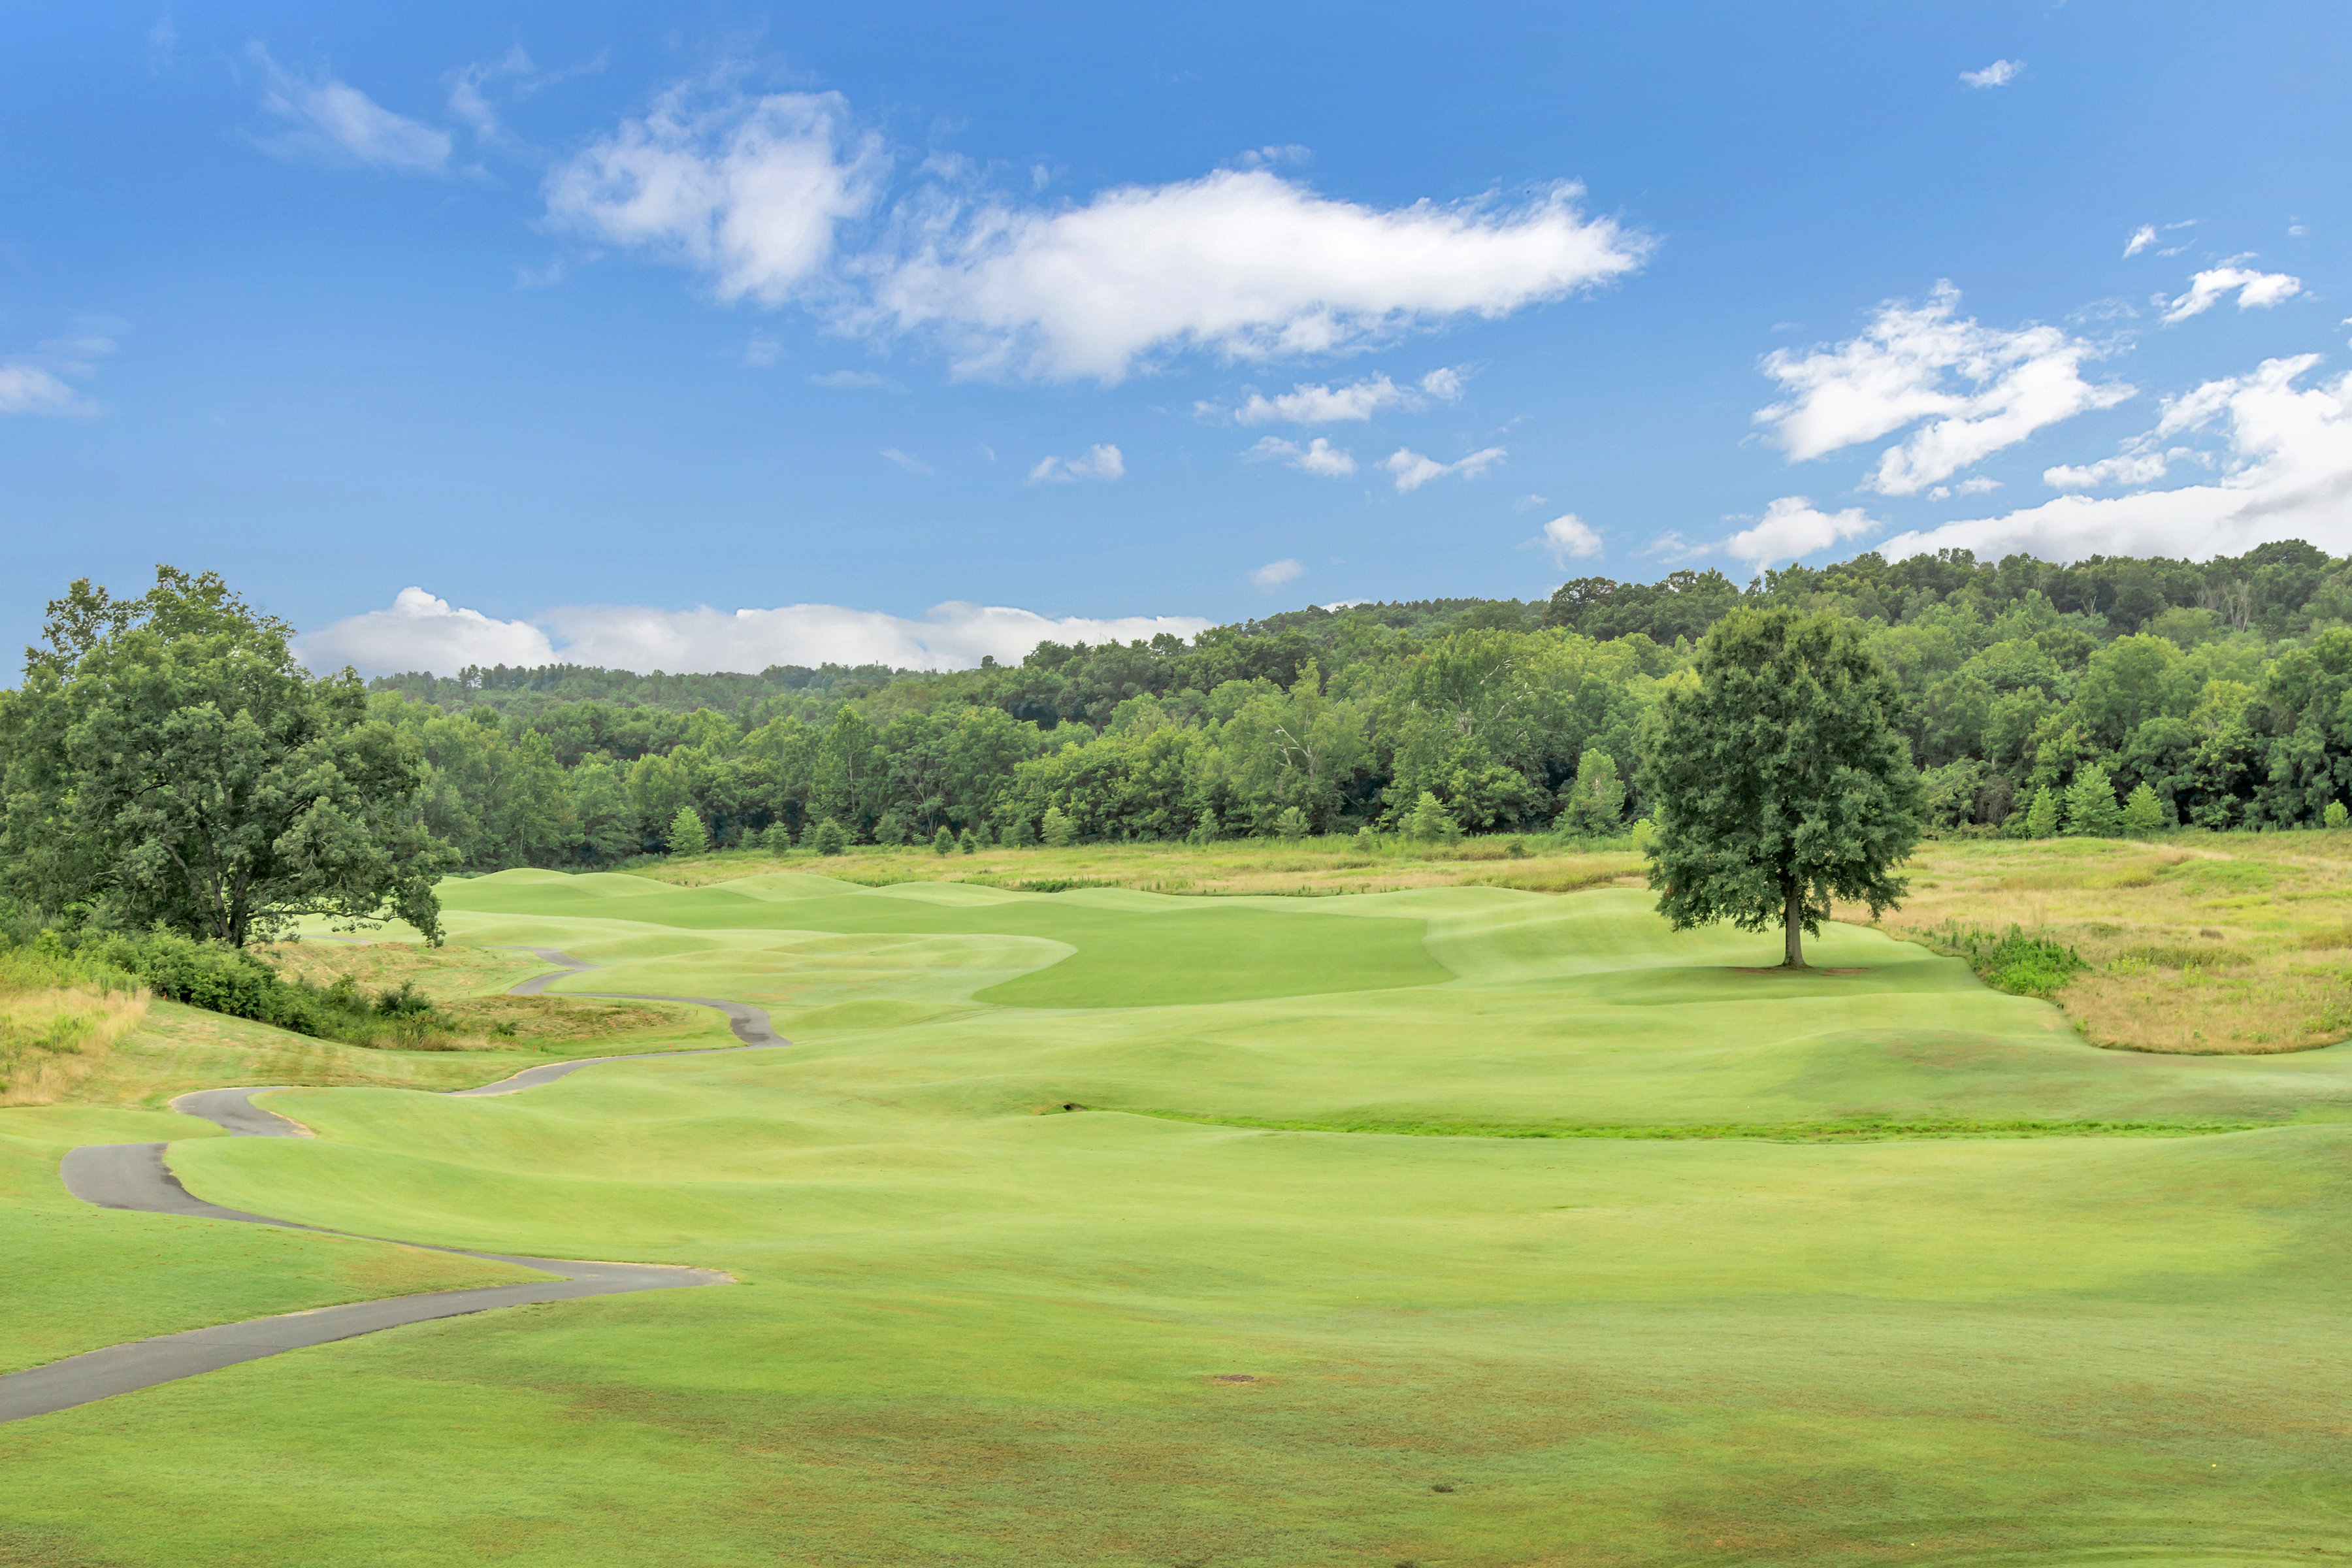 Idyllic view of Glenmore golf course, surrounded by trees against a blue sky